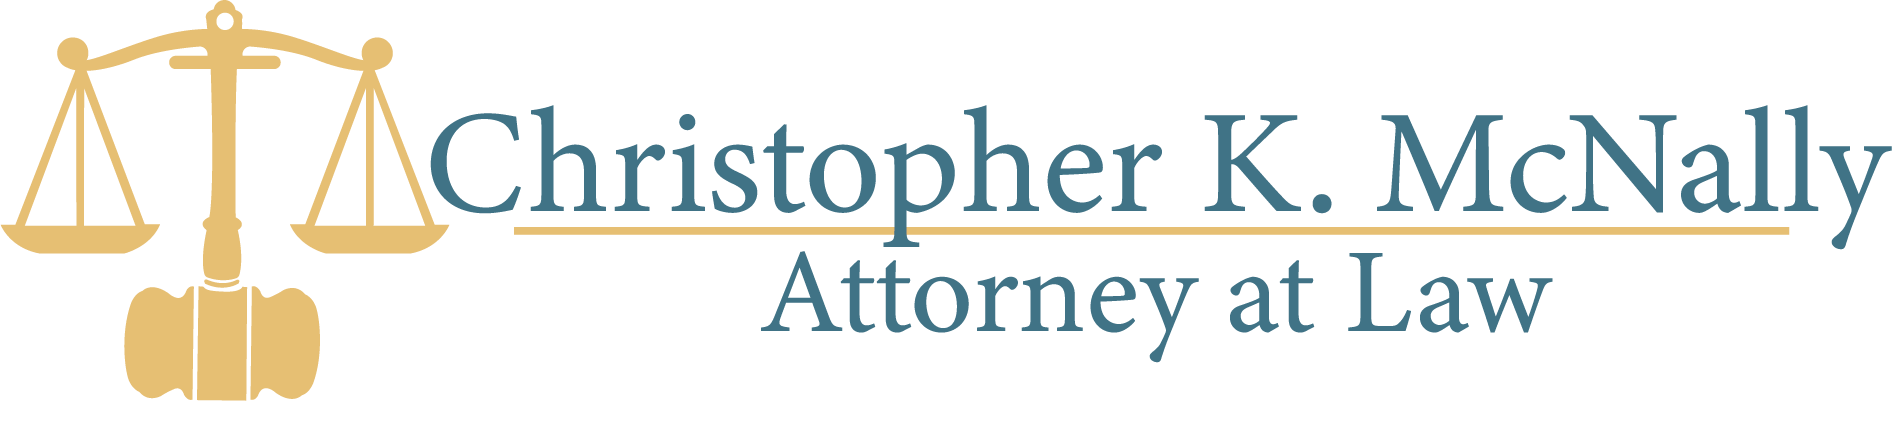 Christopher K. McNally Attorney at Law